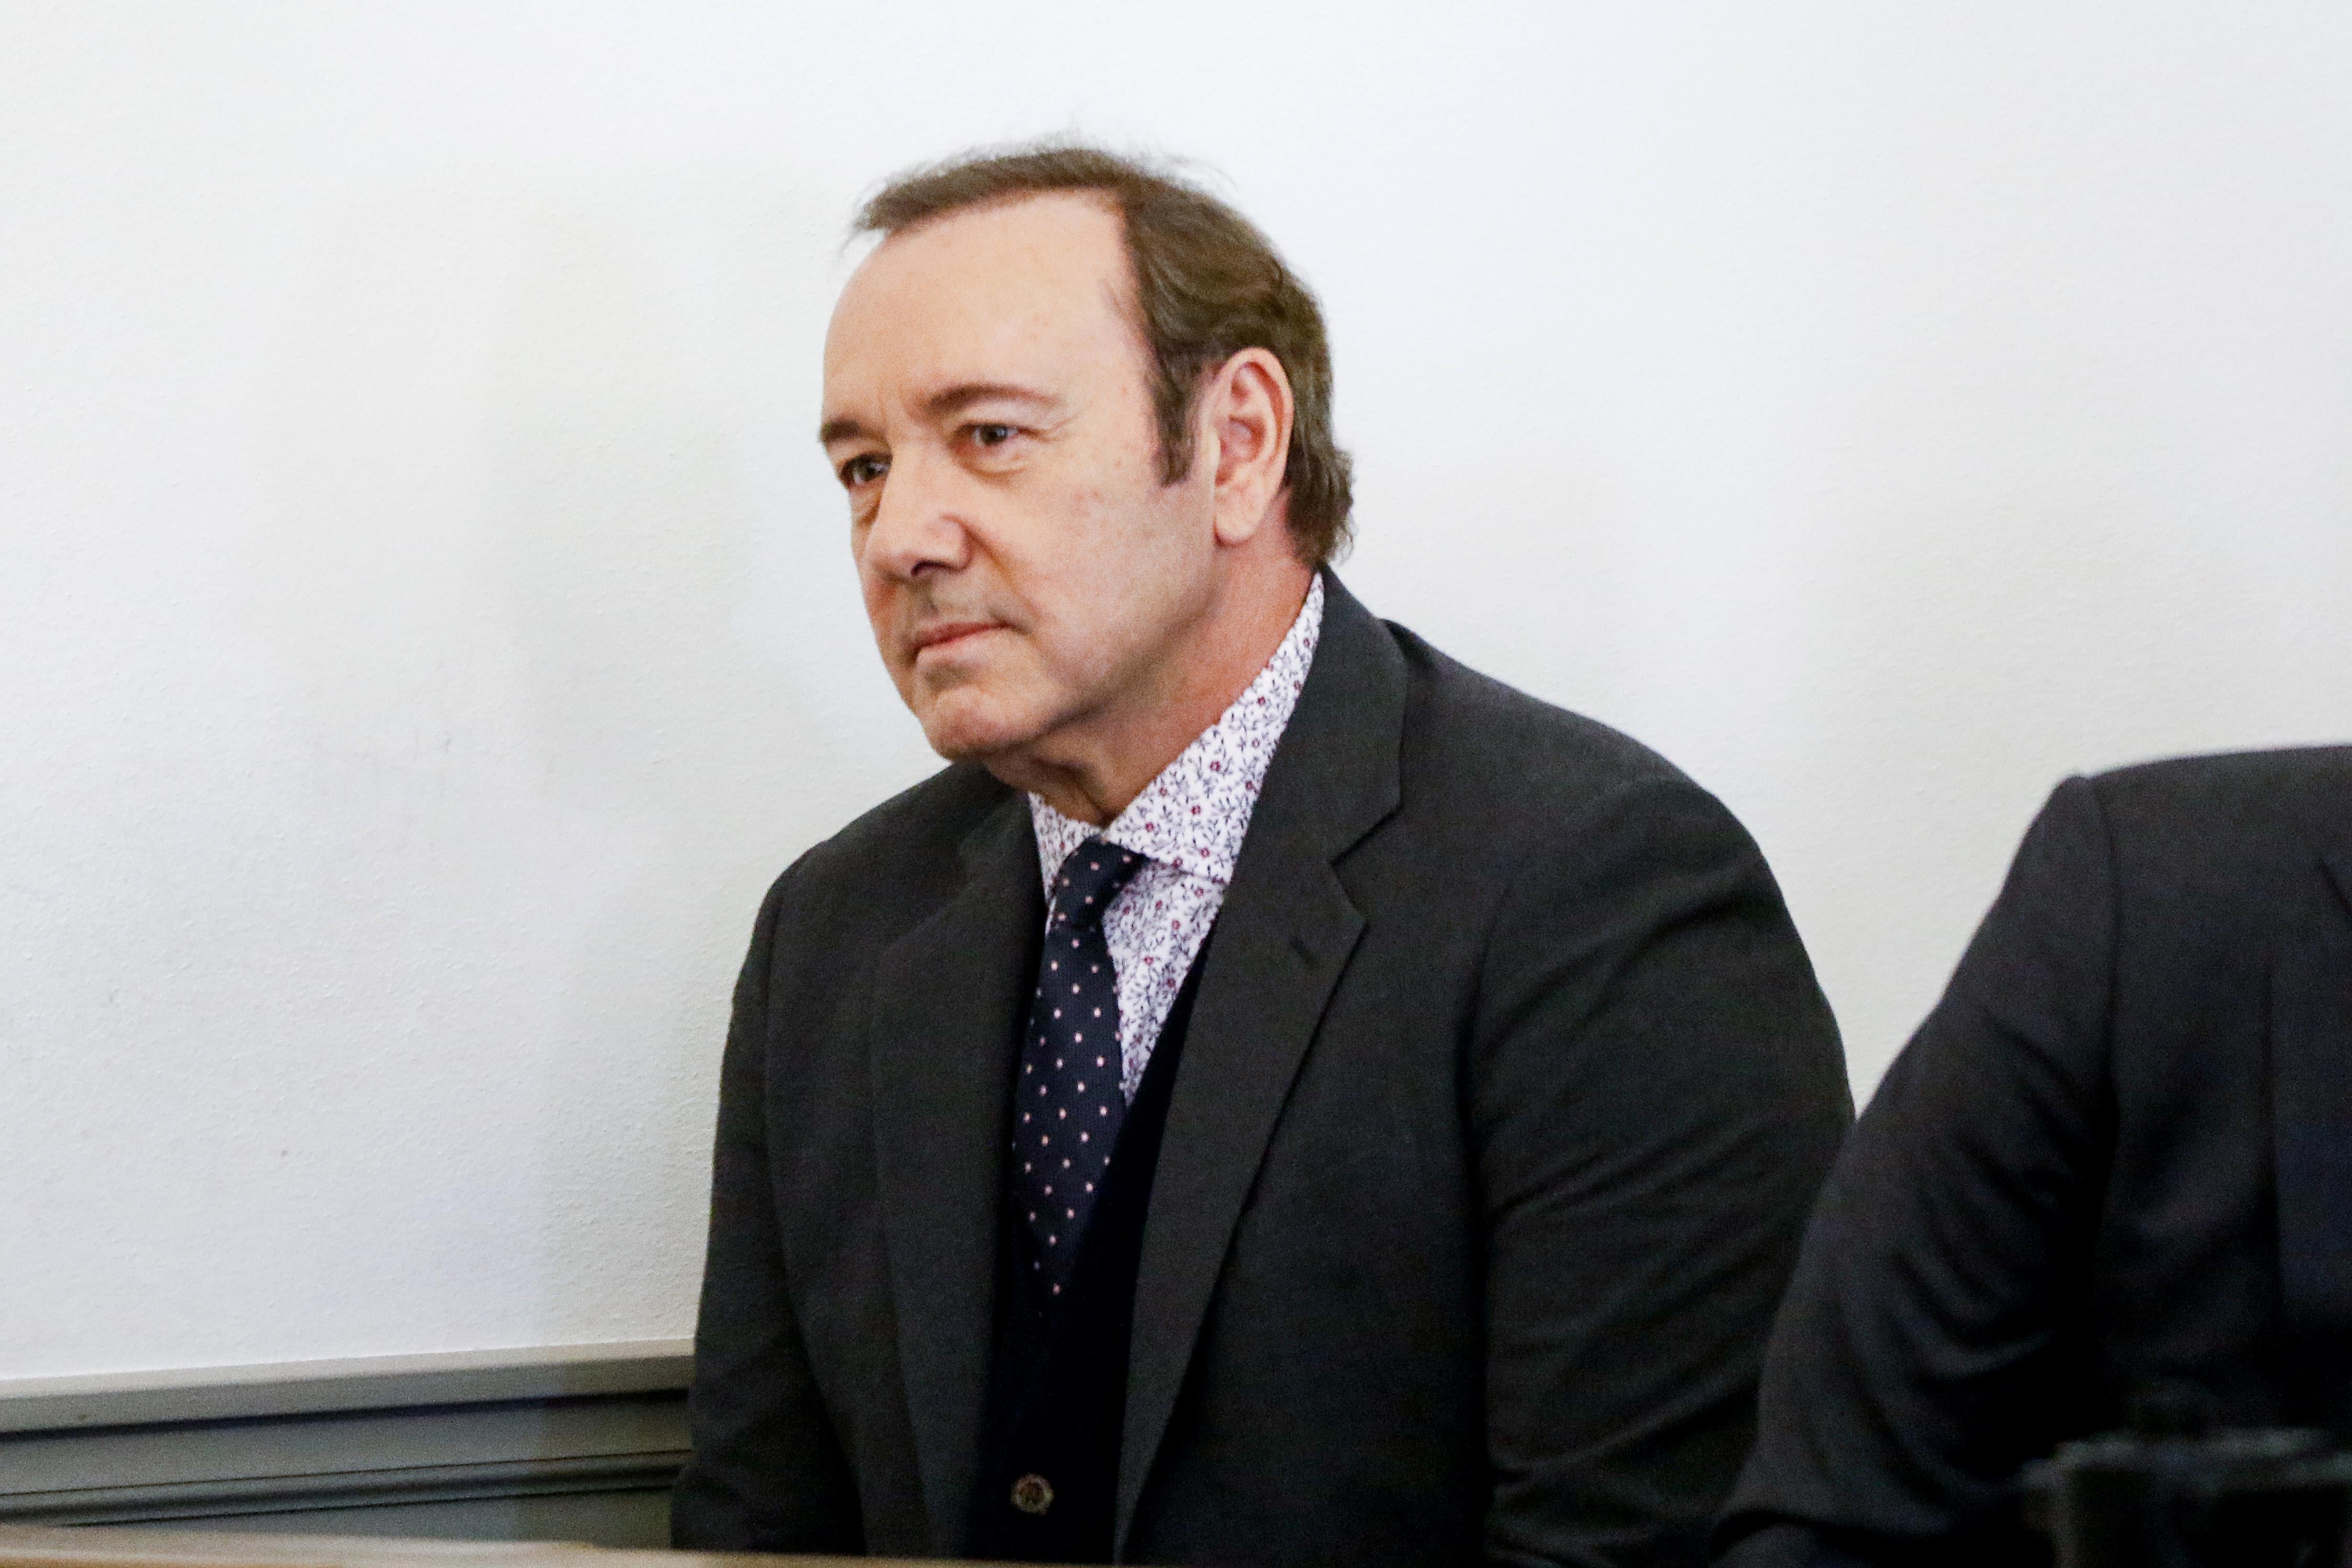 Kevin Spacey, in a gray three-piece suit, sitting at the defense table in a Massachusetts courtroom.